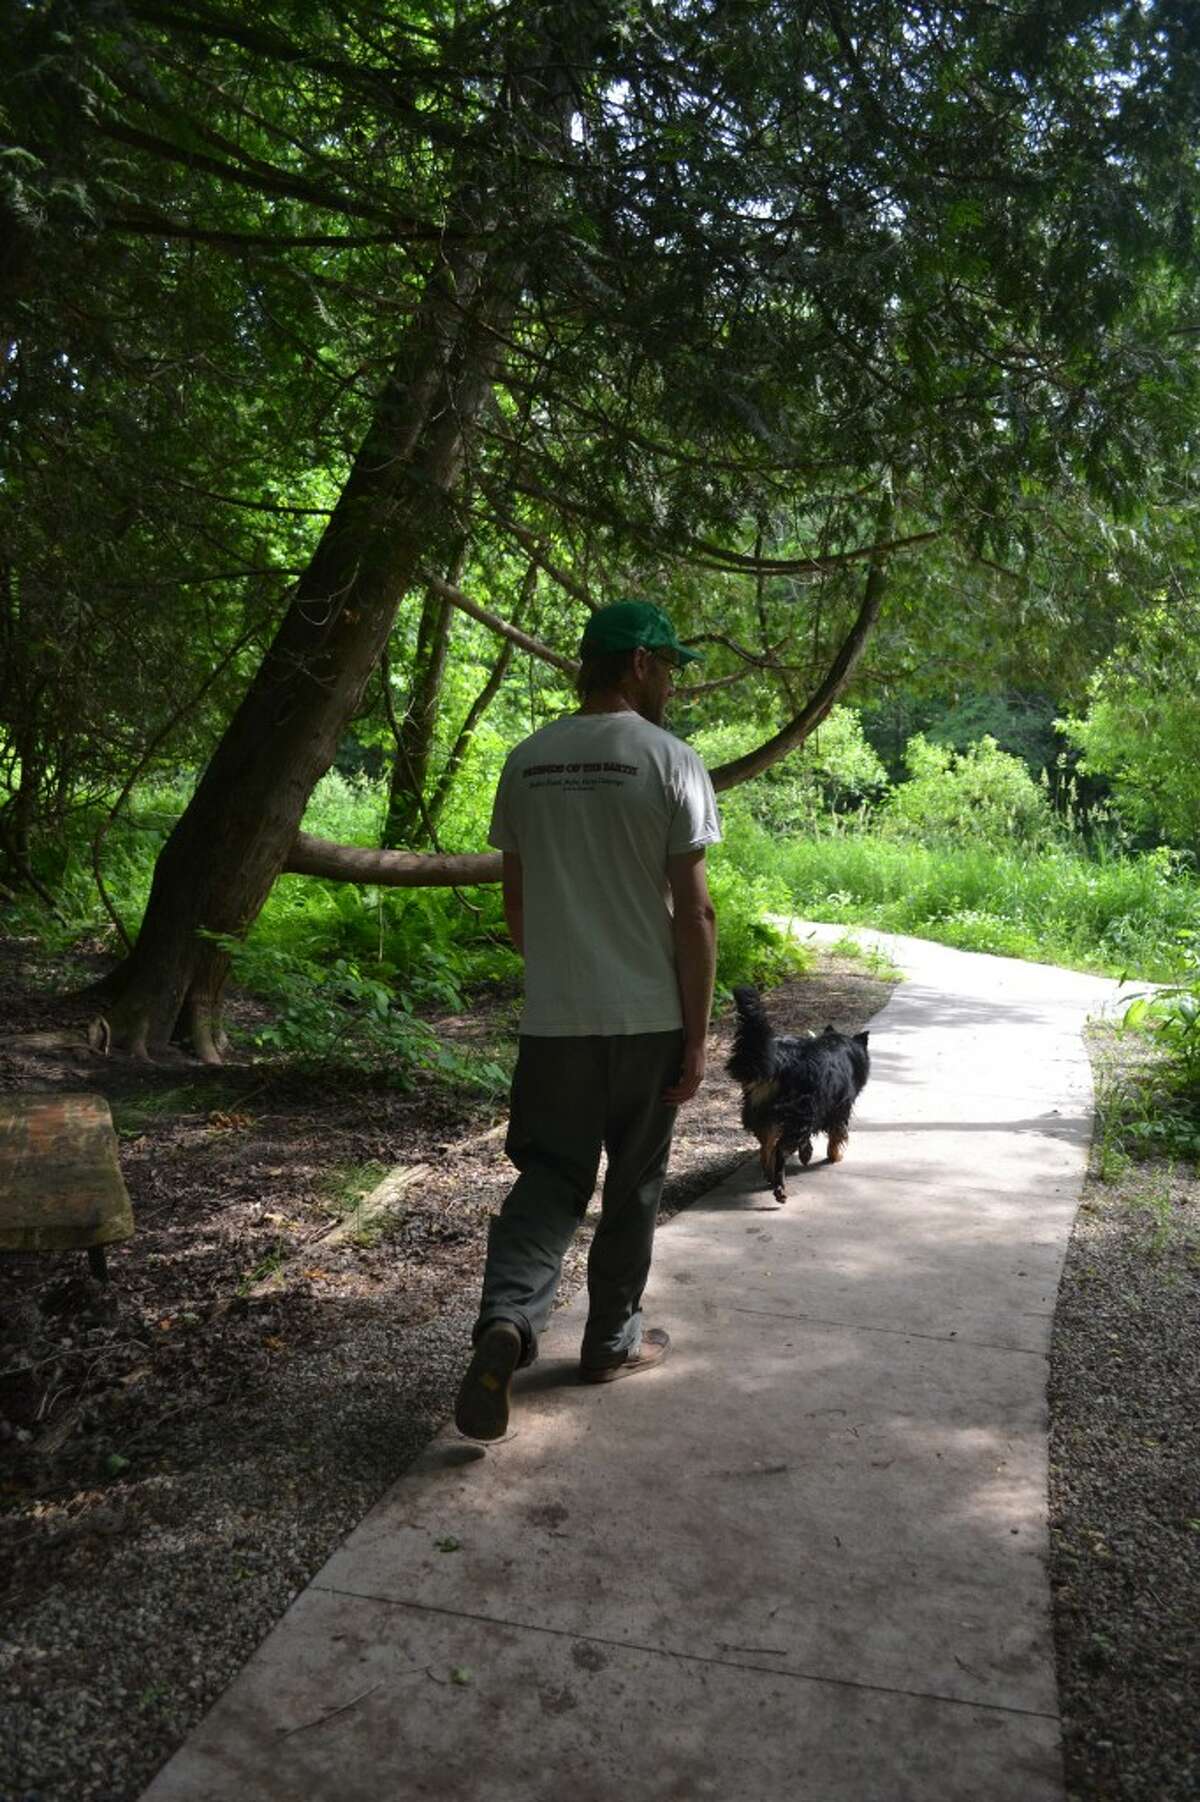 Erik Kinzinger, president of the Spirit of the Woods Conservation Club, walks with his dog Mabel along “Mickey’s Trail,” a universally-accessible pathway on club land. (Meg LeDuc/News Advocate)